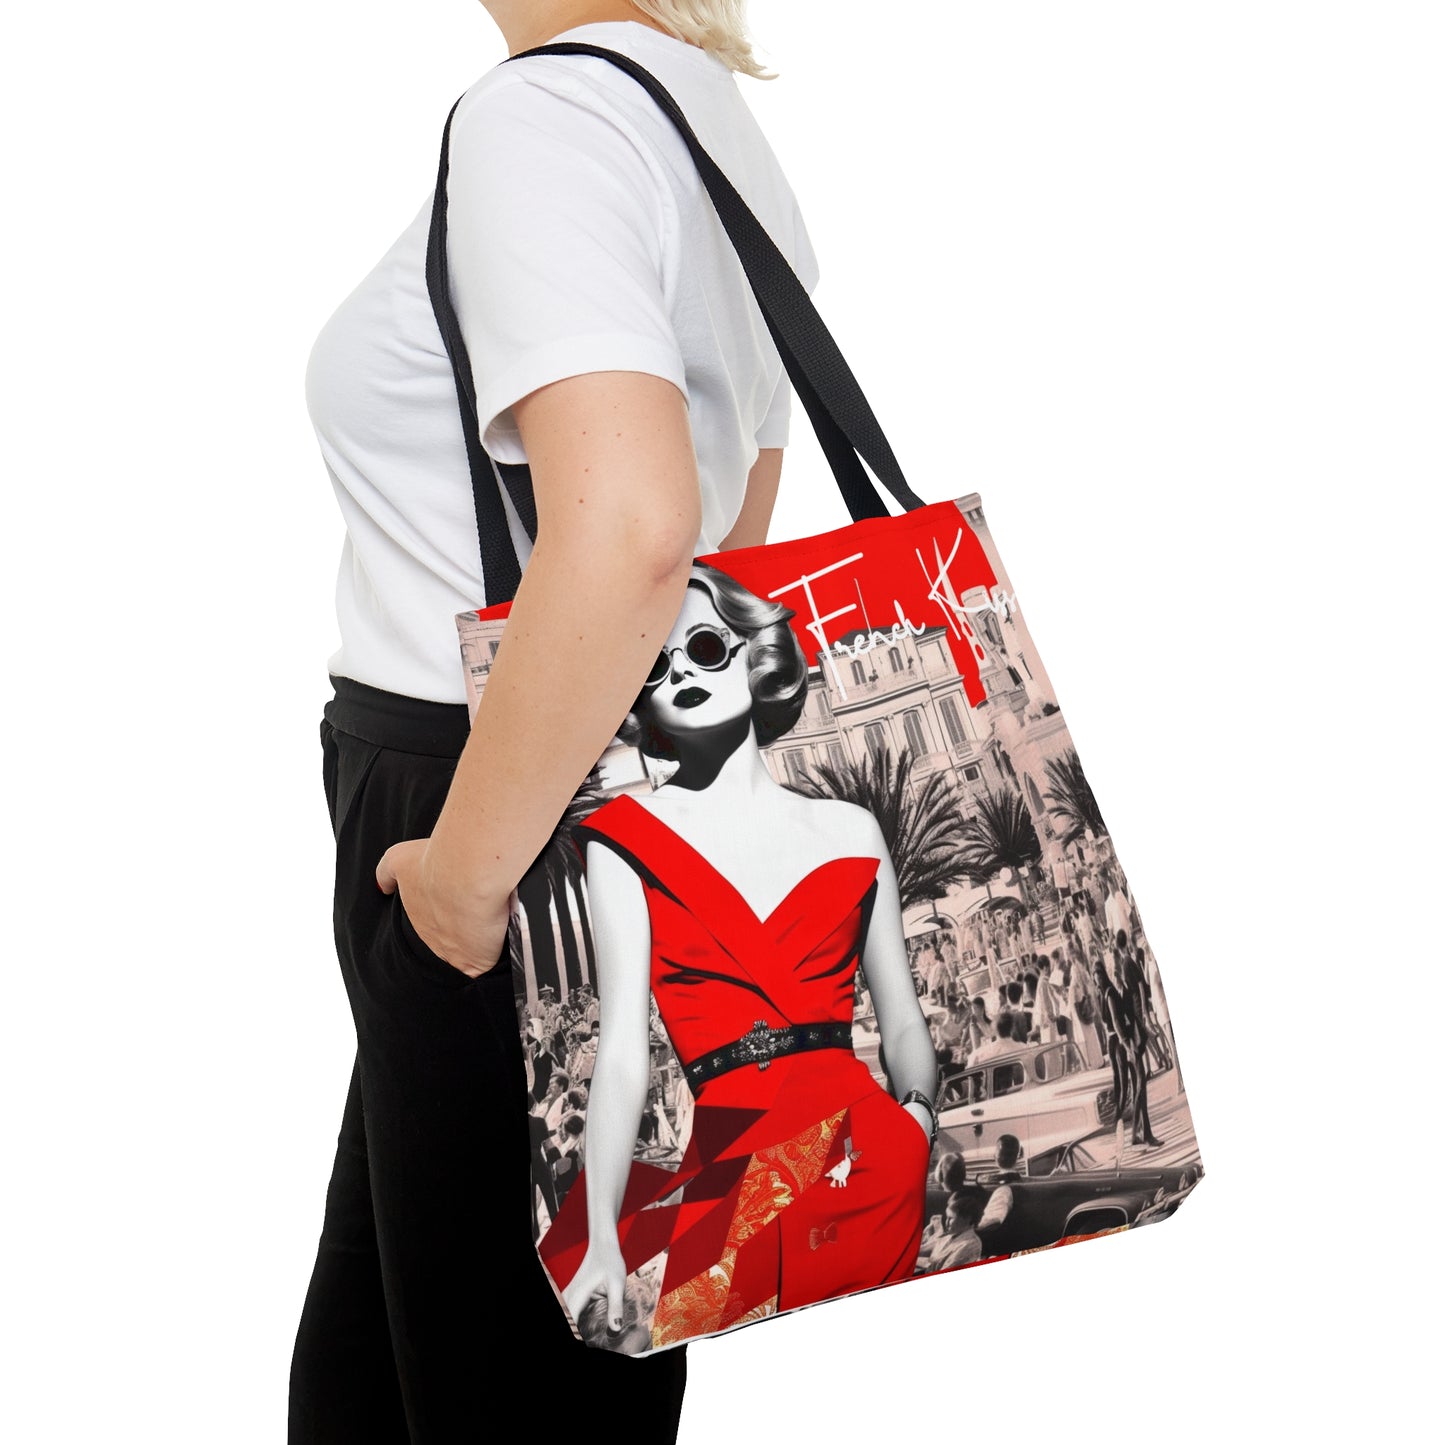 EN ROUGE French Kiss Pop Art, Sexy, Sassy Tote Bag, France Couture, Pop Art, Travel, Fashion, Luxury, Chic French designer deluxe, must have gift item